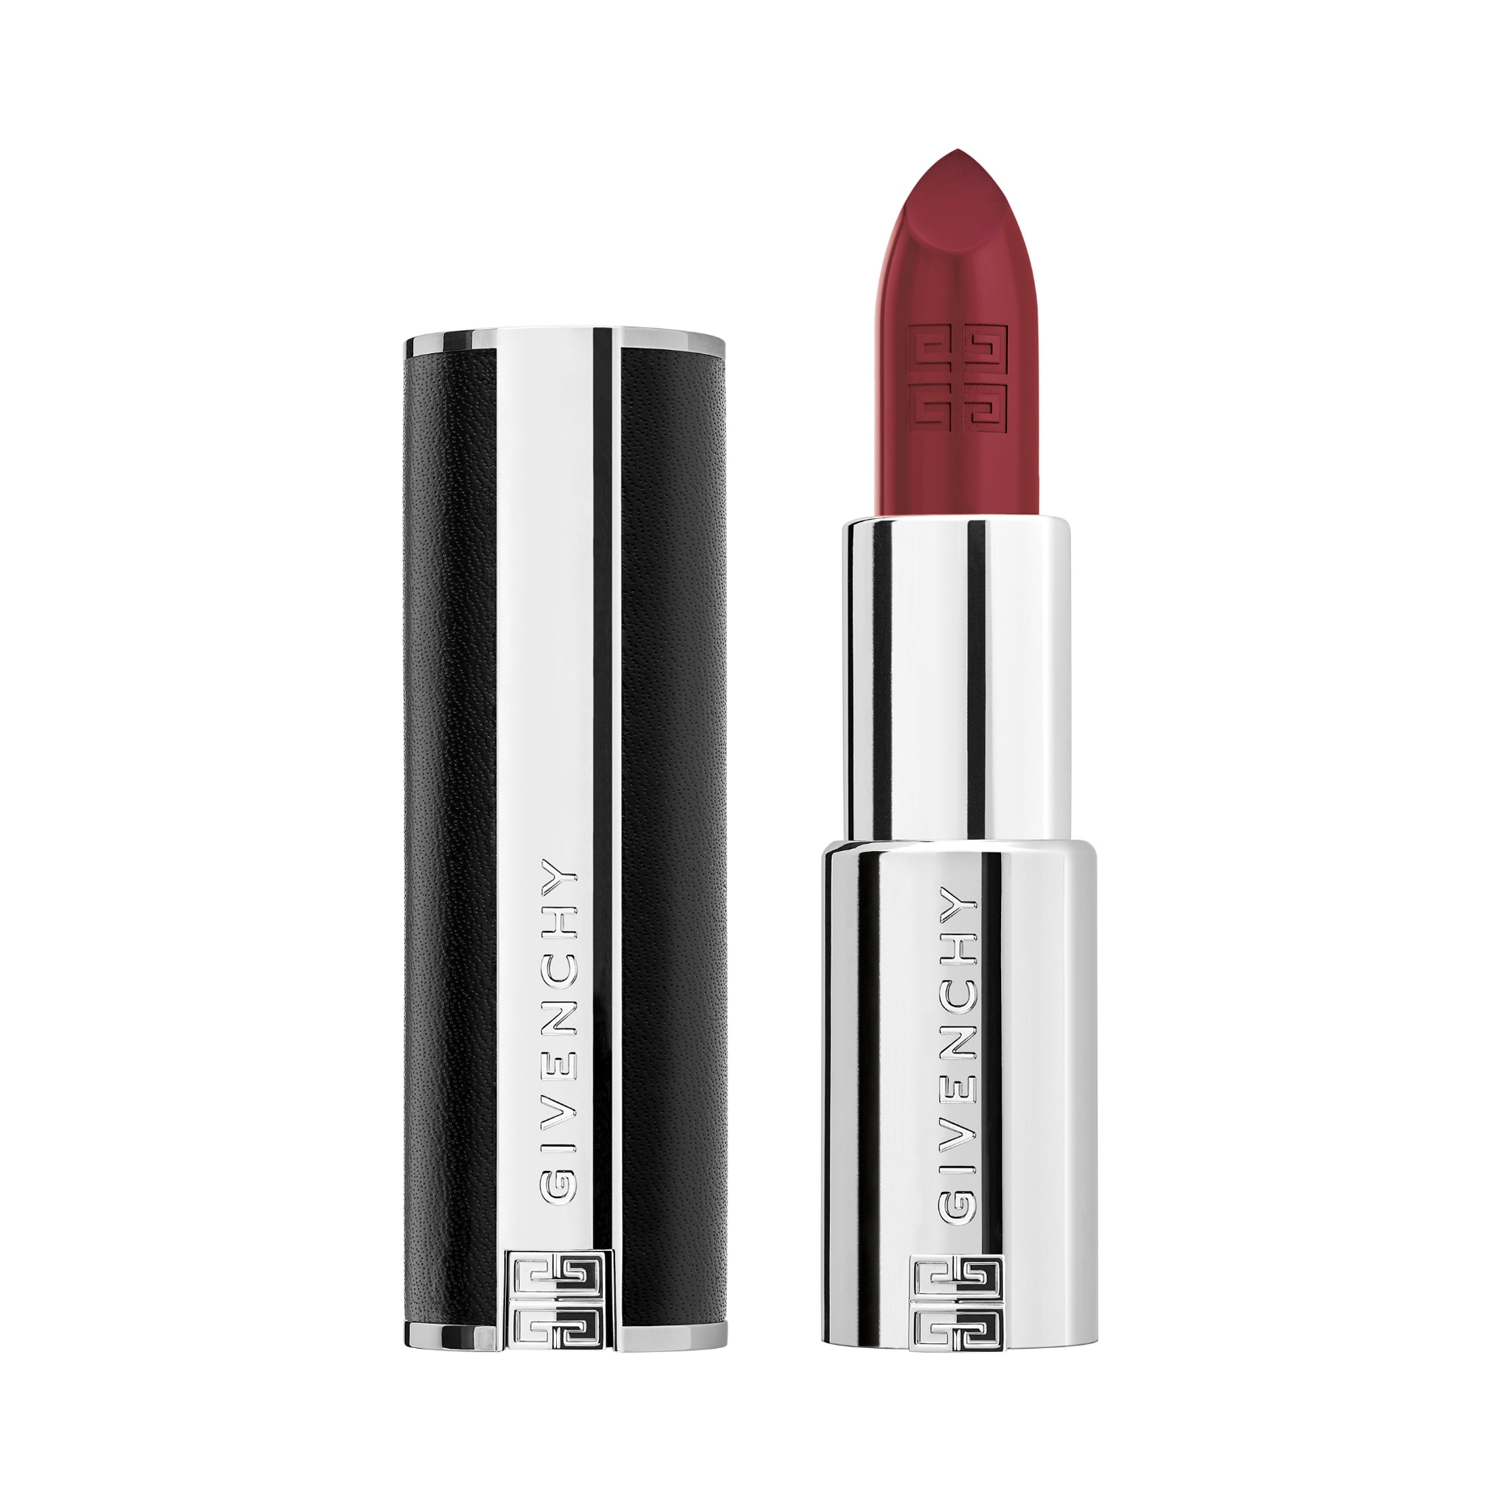 Givenchy | Givenchy Le Rouge Interdit Intense Silk Lipstick - N 117 Rouge Erable​ (3.4g)